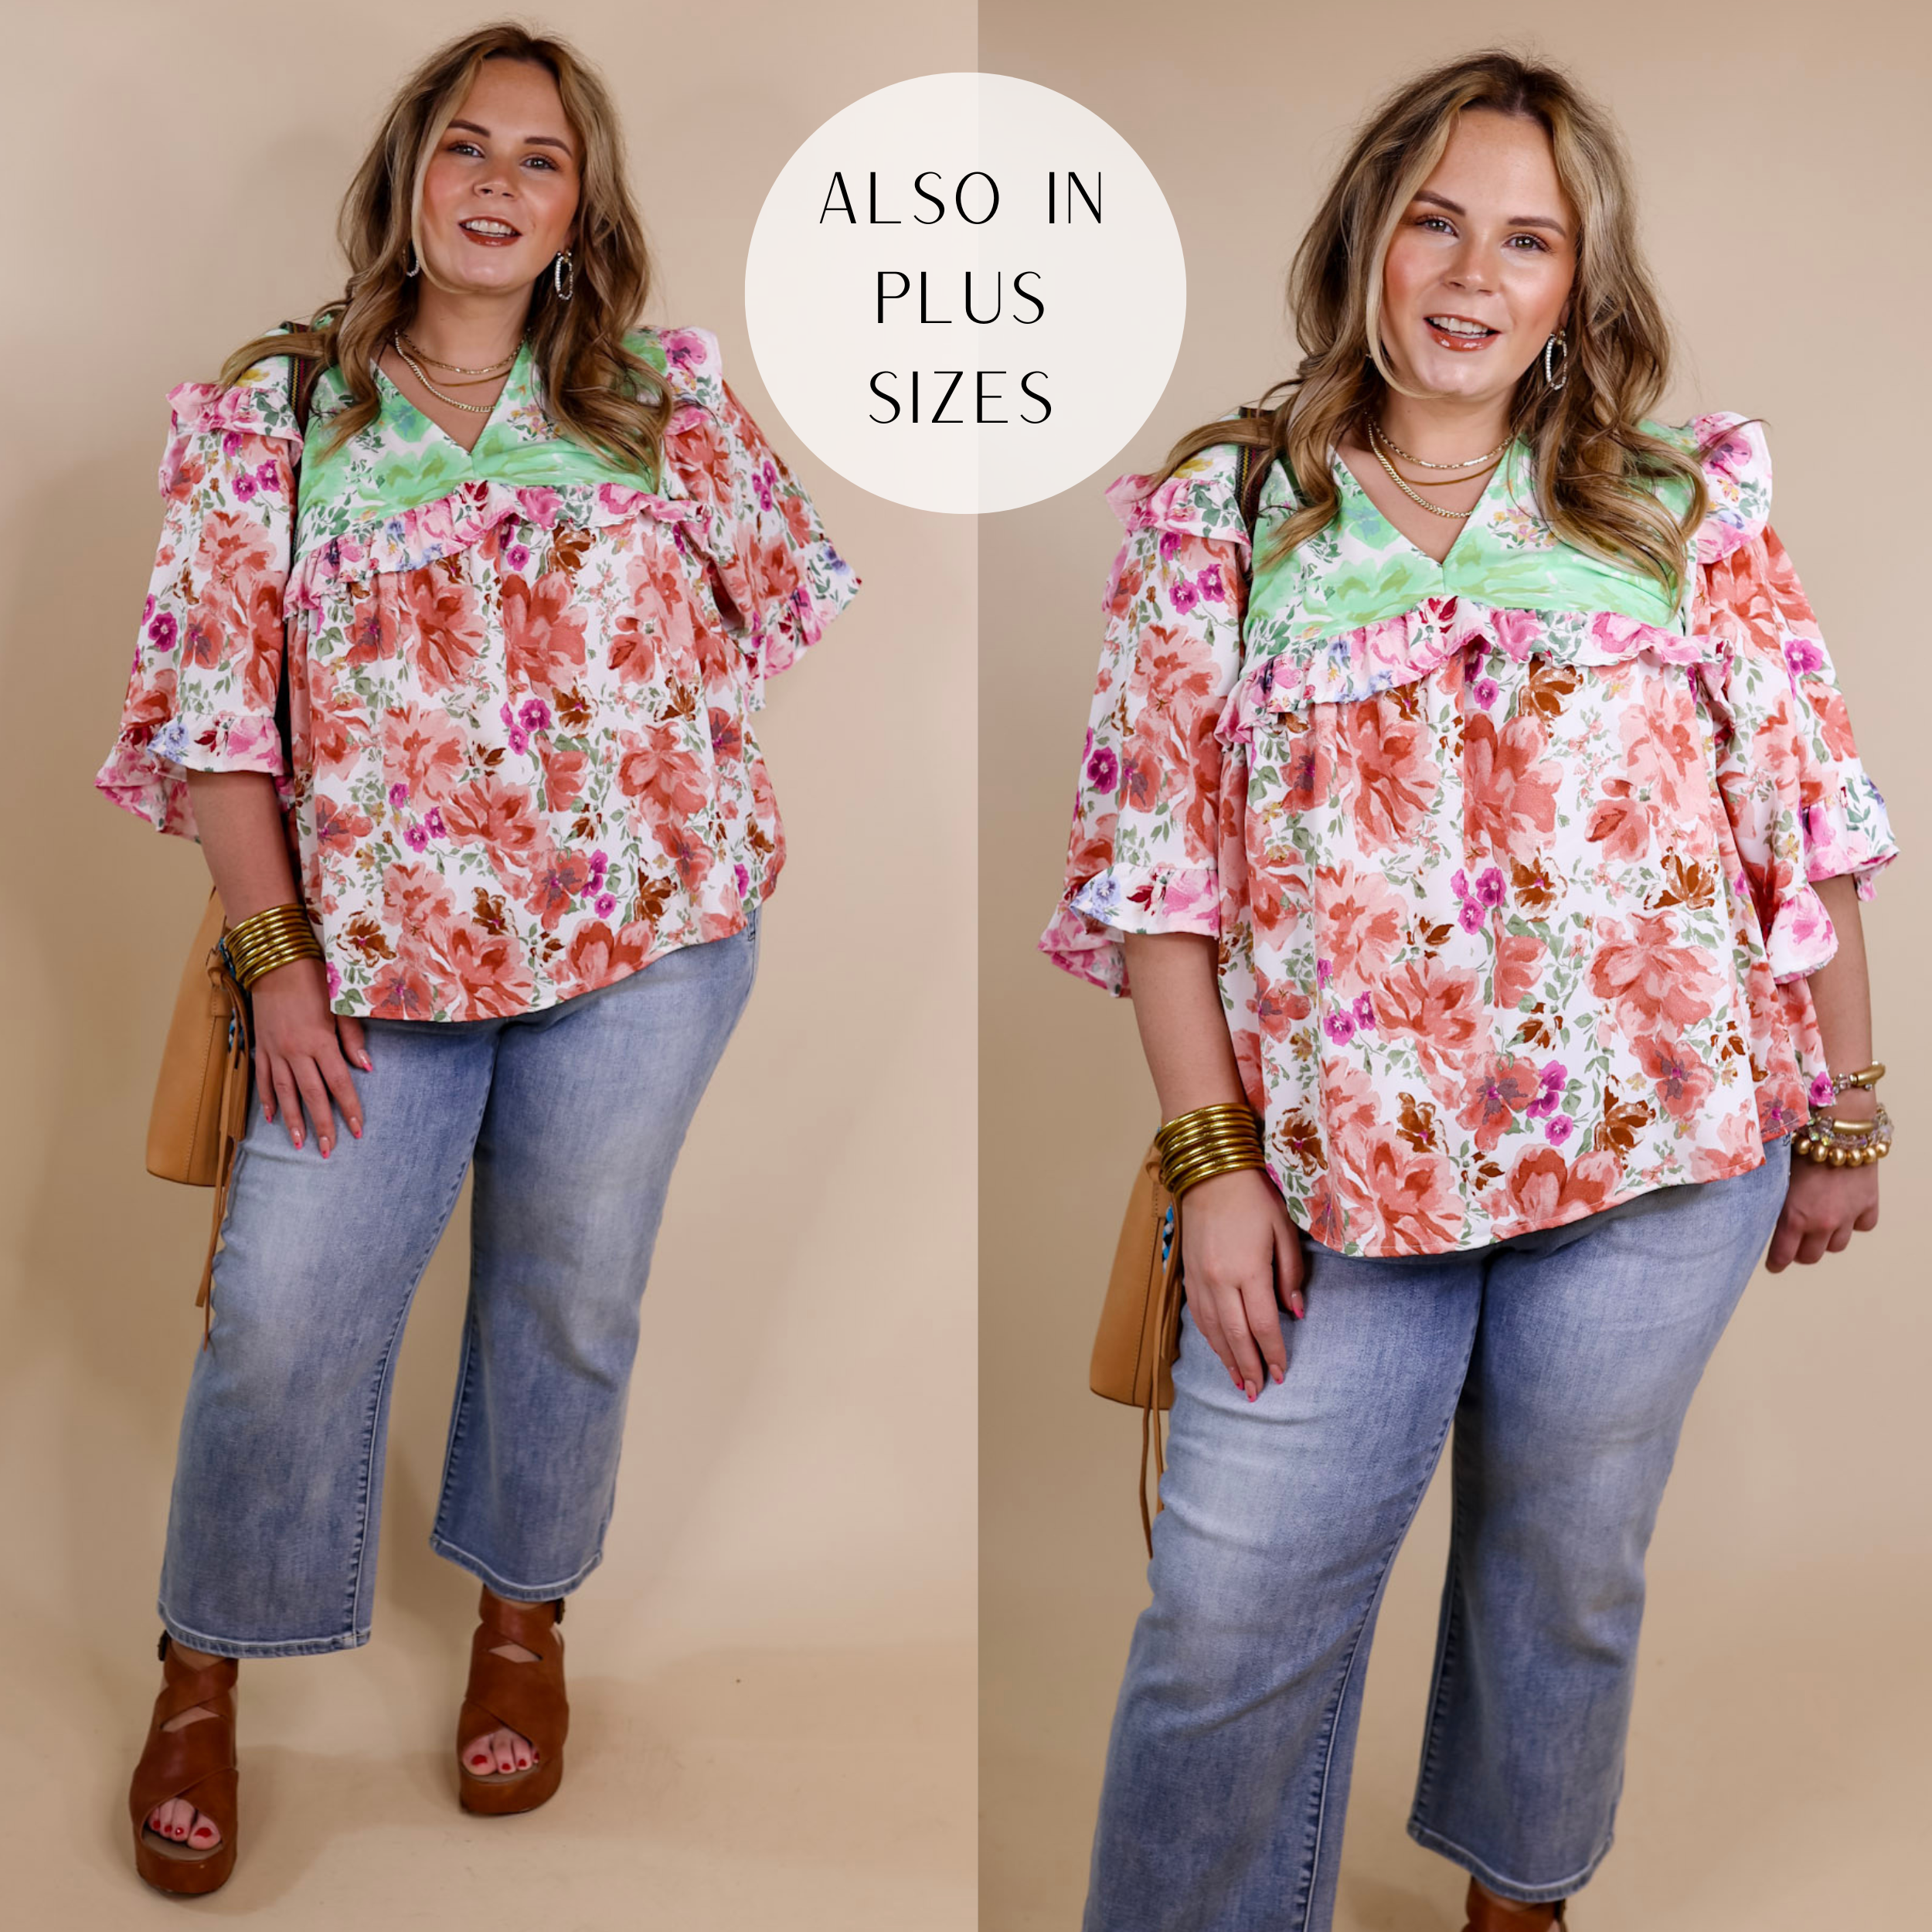 Model is wearing a floral top with short sleeves, ruffle details, a v neckline, in a mix of orange, pink, and green. Model has it paired with light wash jeans, tan wedges, and gold jewelry.